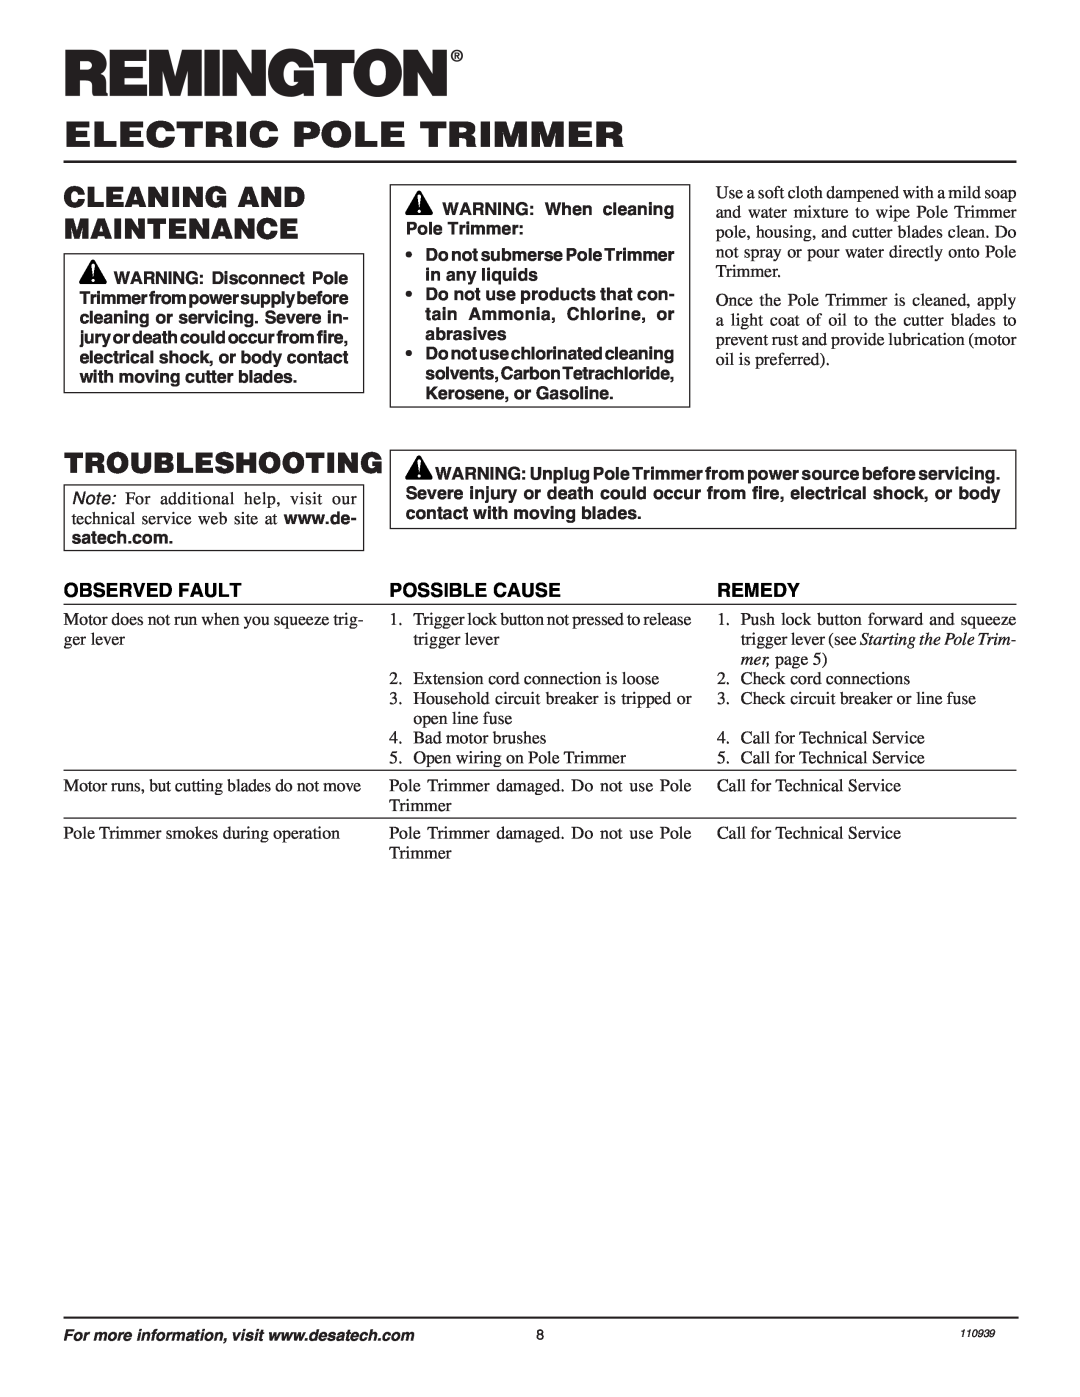 Desa 110946-01A Cleaning And Maintenance, Troubleshooting, Observed Fault, Possible Cause, Remedy, Electric Pole Trimmer 